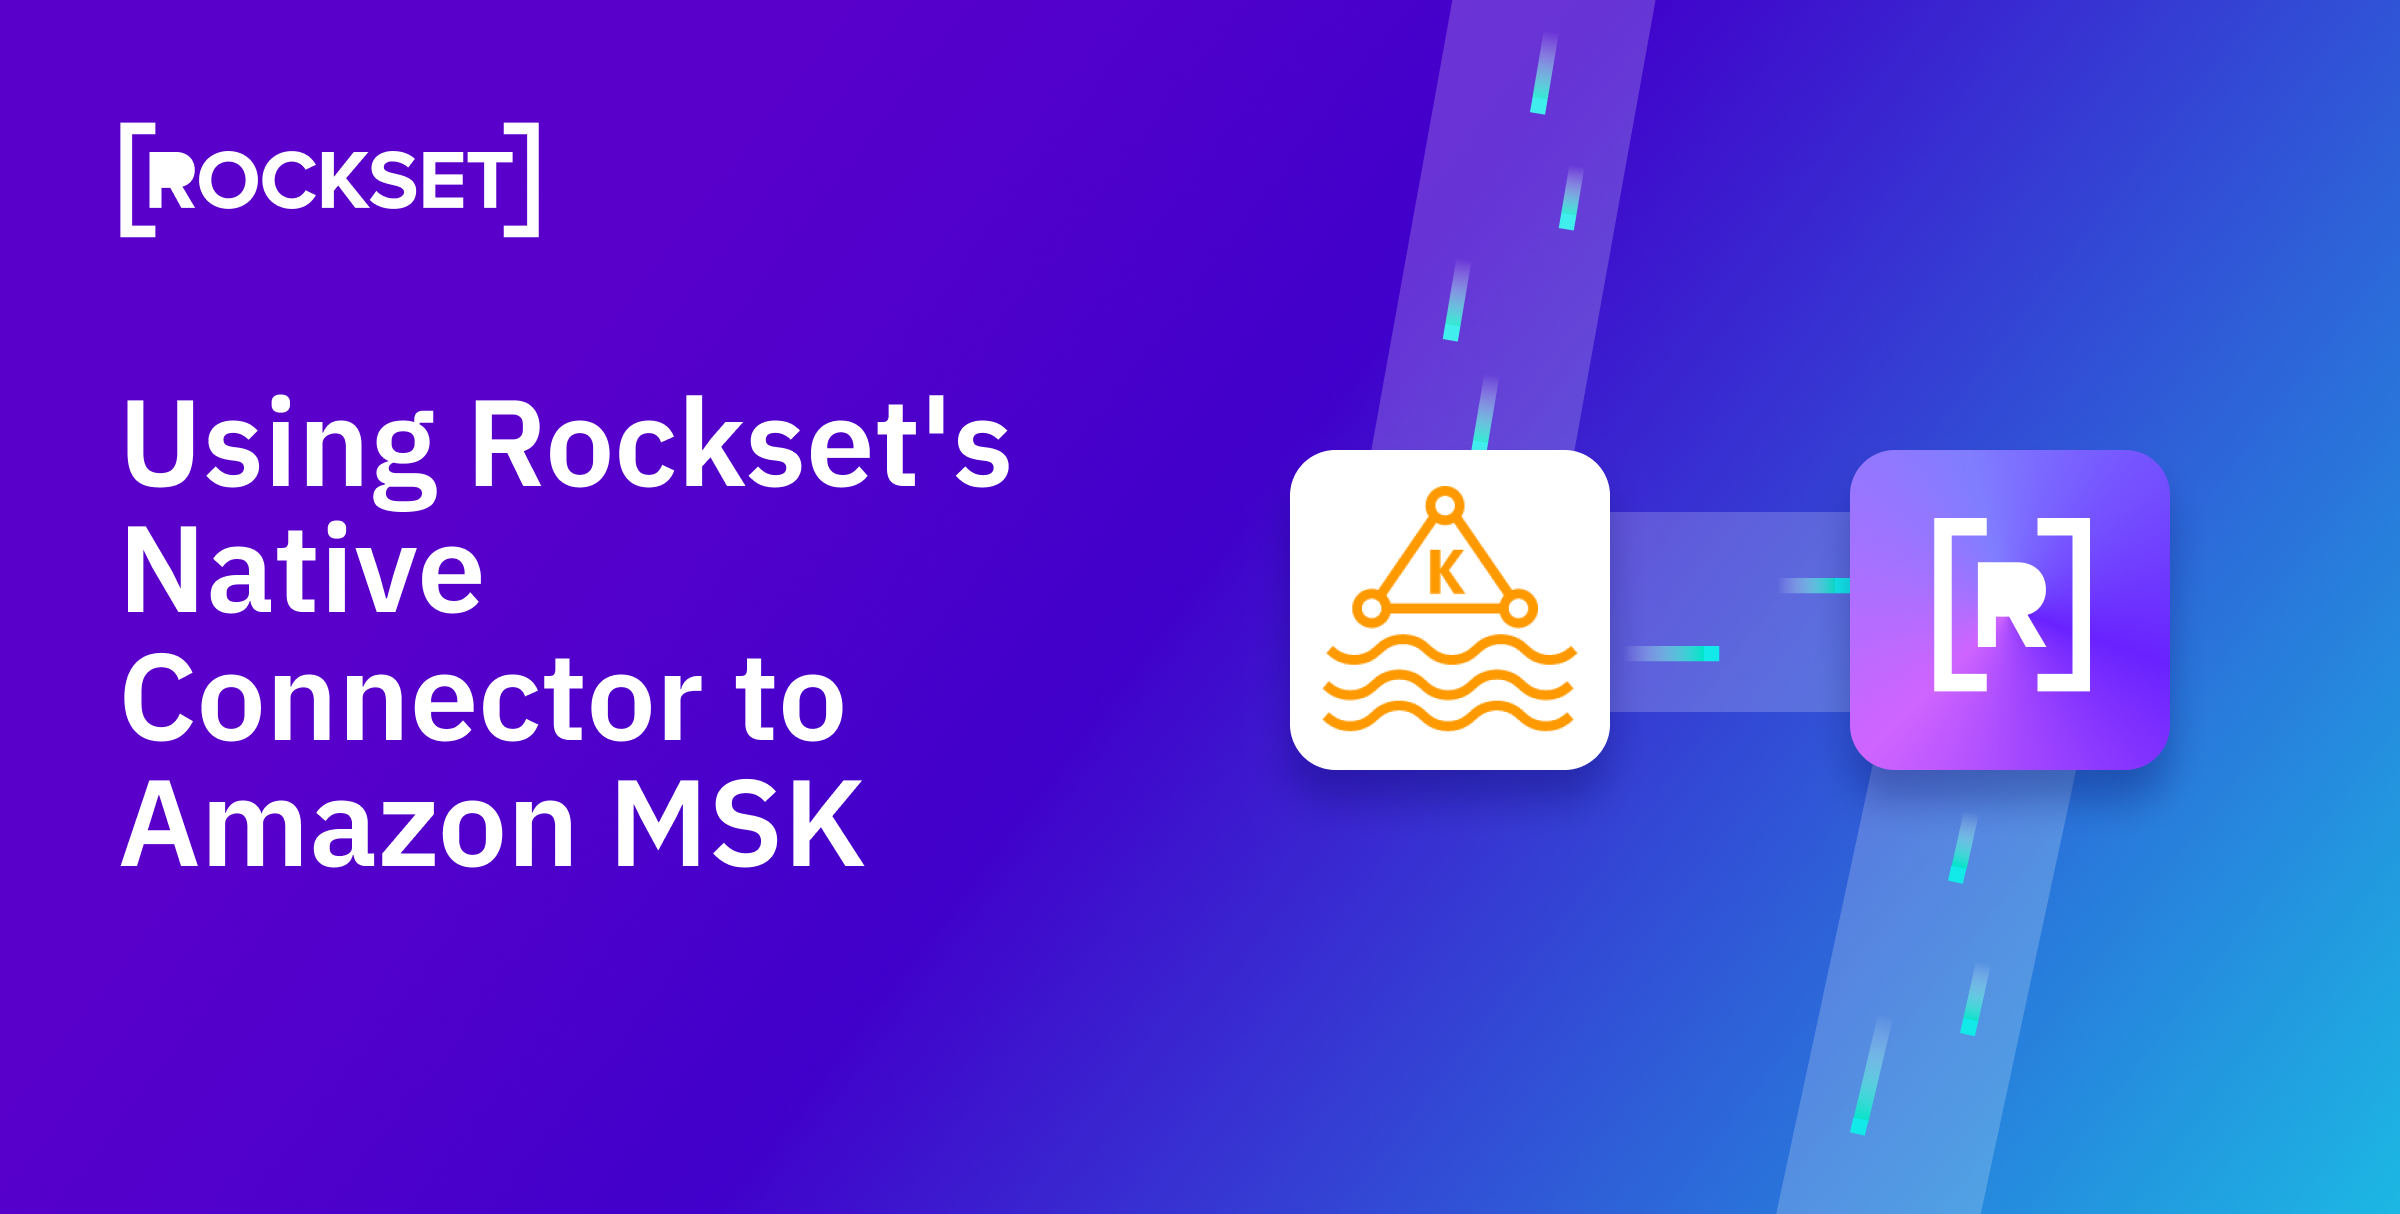 You are currently viewing Utilizing the Amazon MSK Native Connector to Rockset